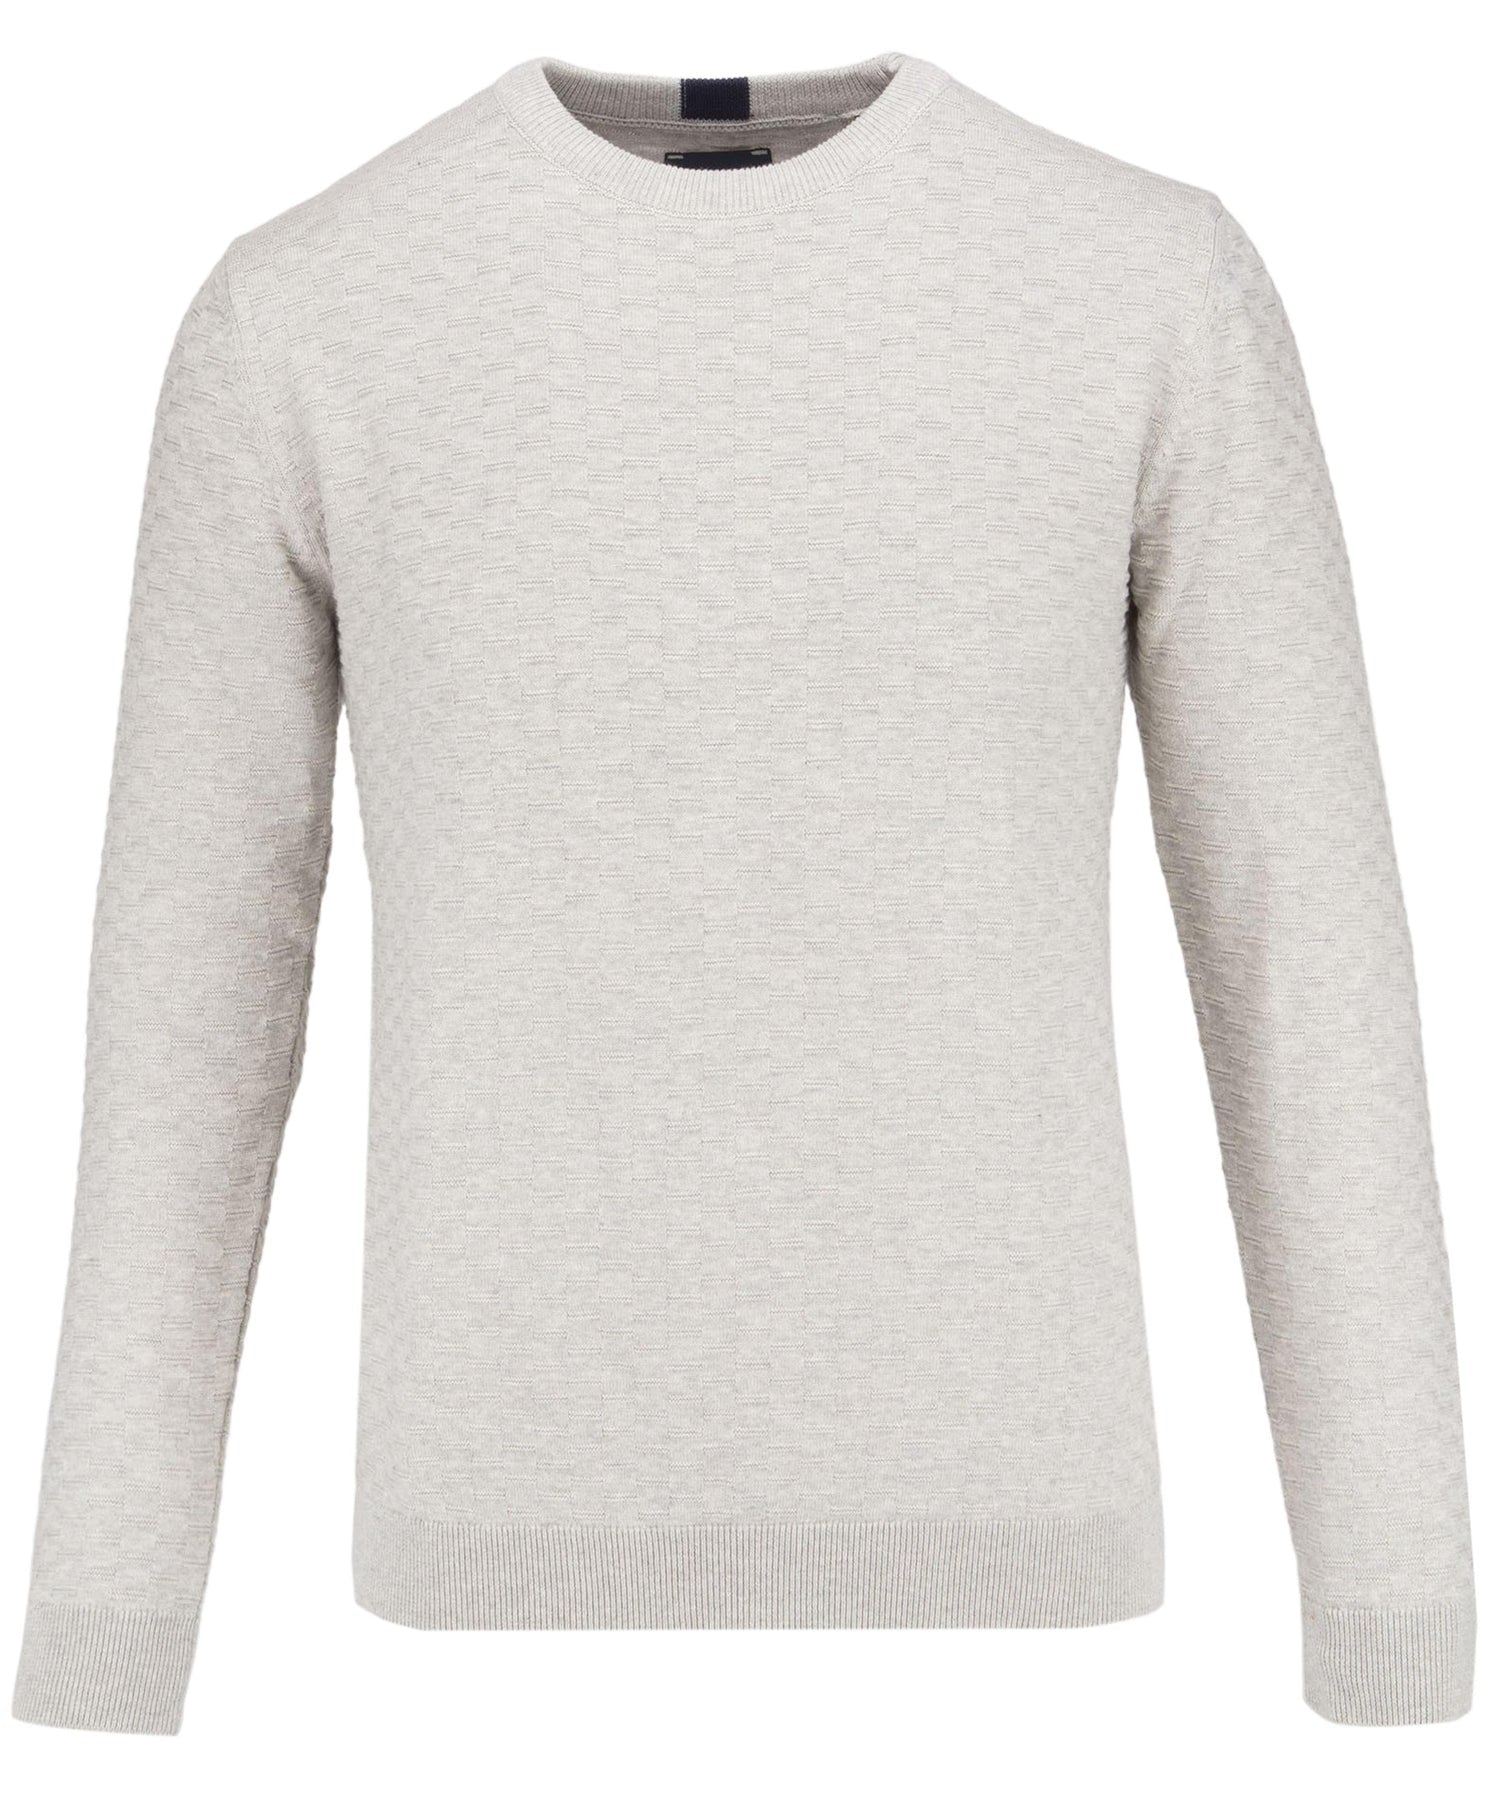 Guide London Textured Long Sleeve Knit Jumper - Grey